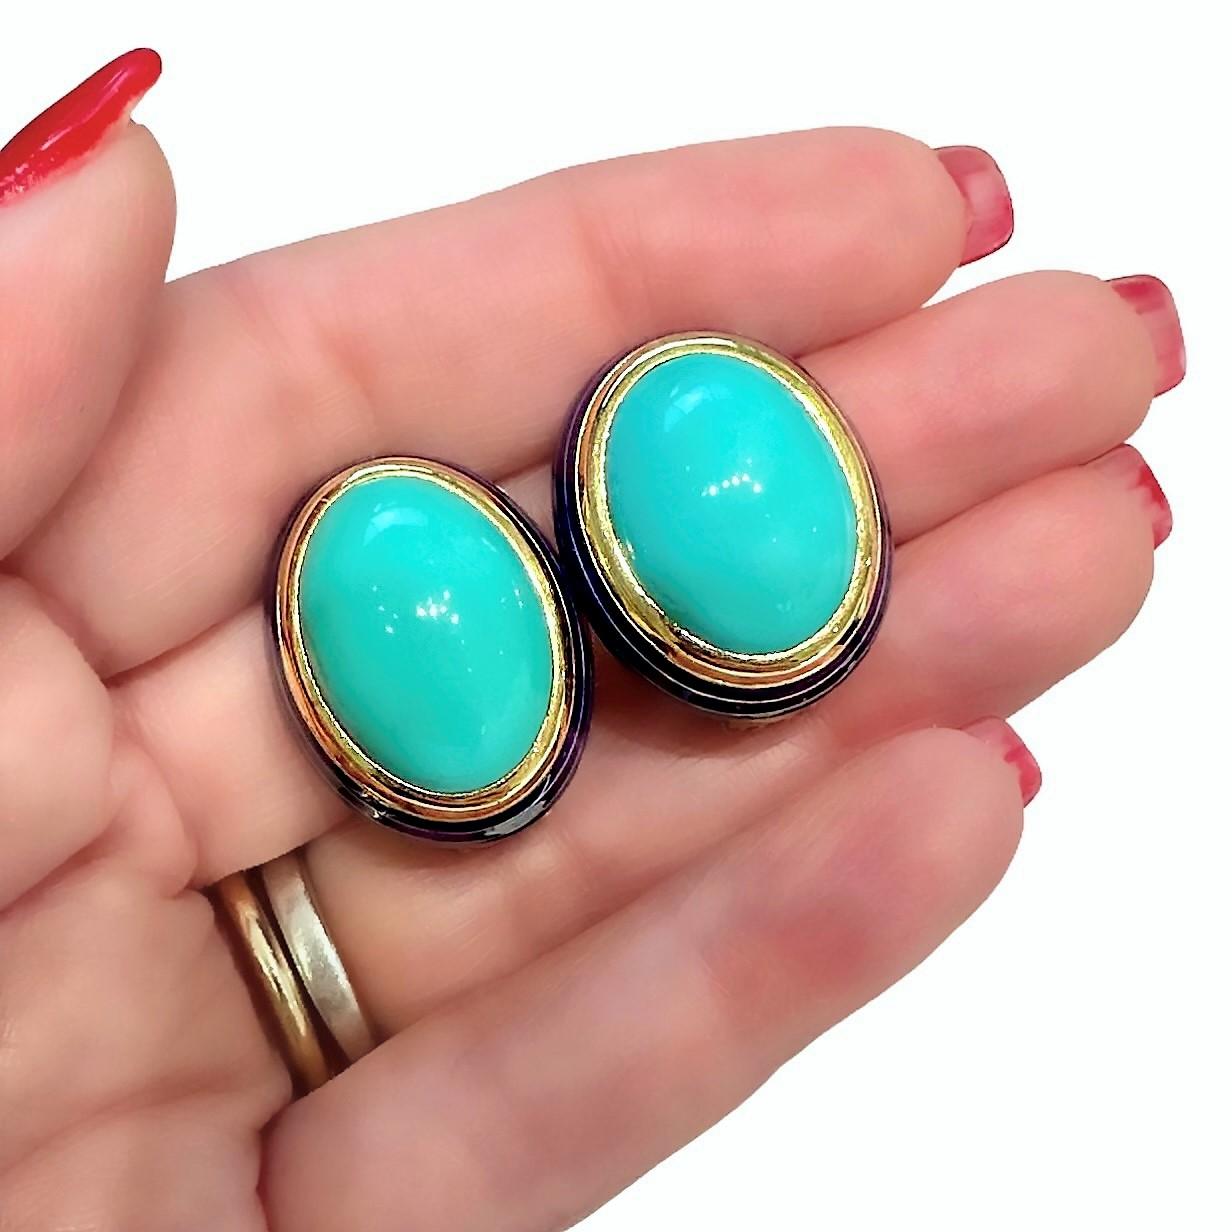 Tailored, Mid-20th Century 18K Yellow Gold, Turquoise and Blue Enamel Earrings In Good Condition For Sale In Palm Beach, FL